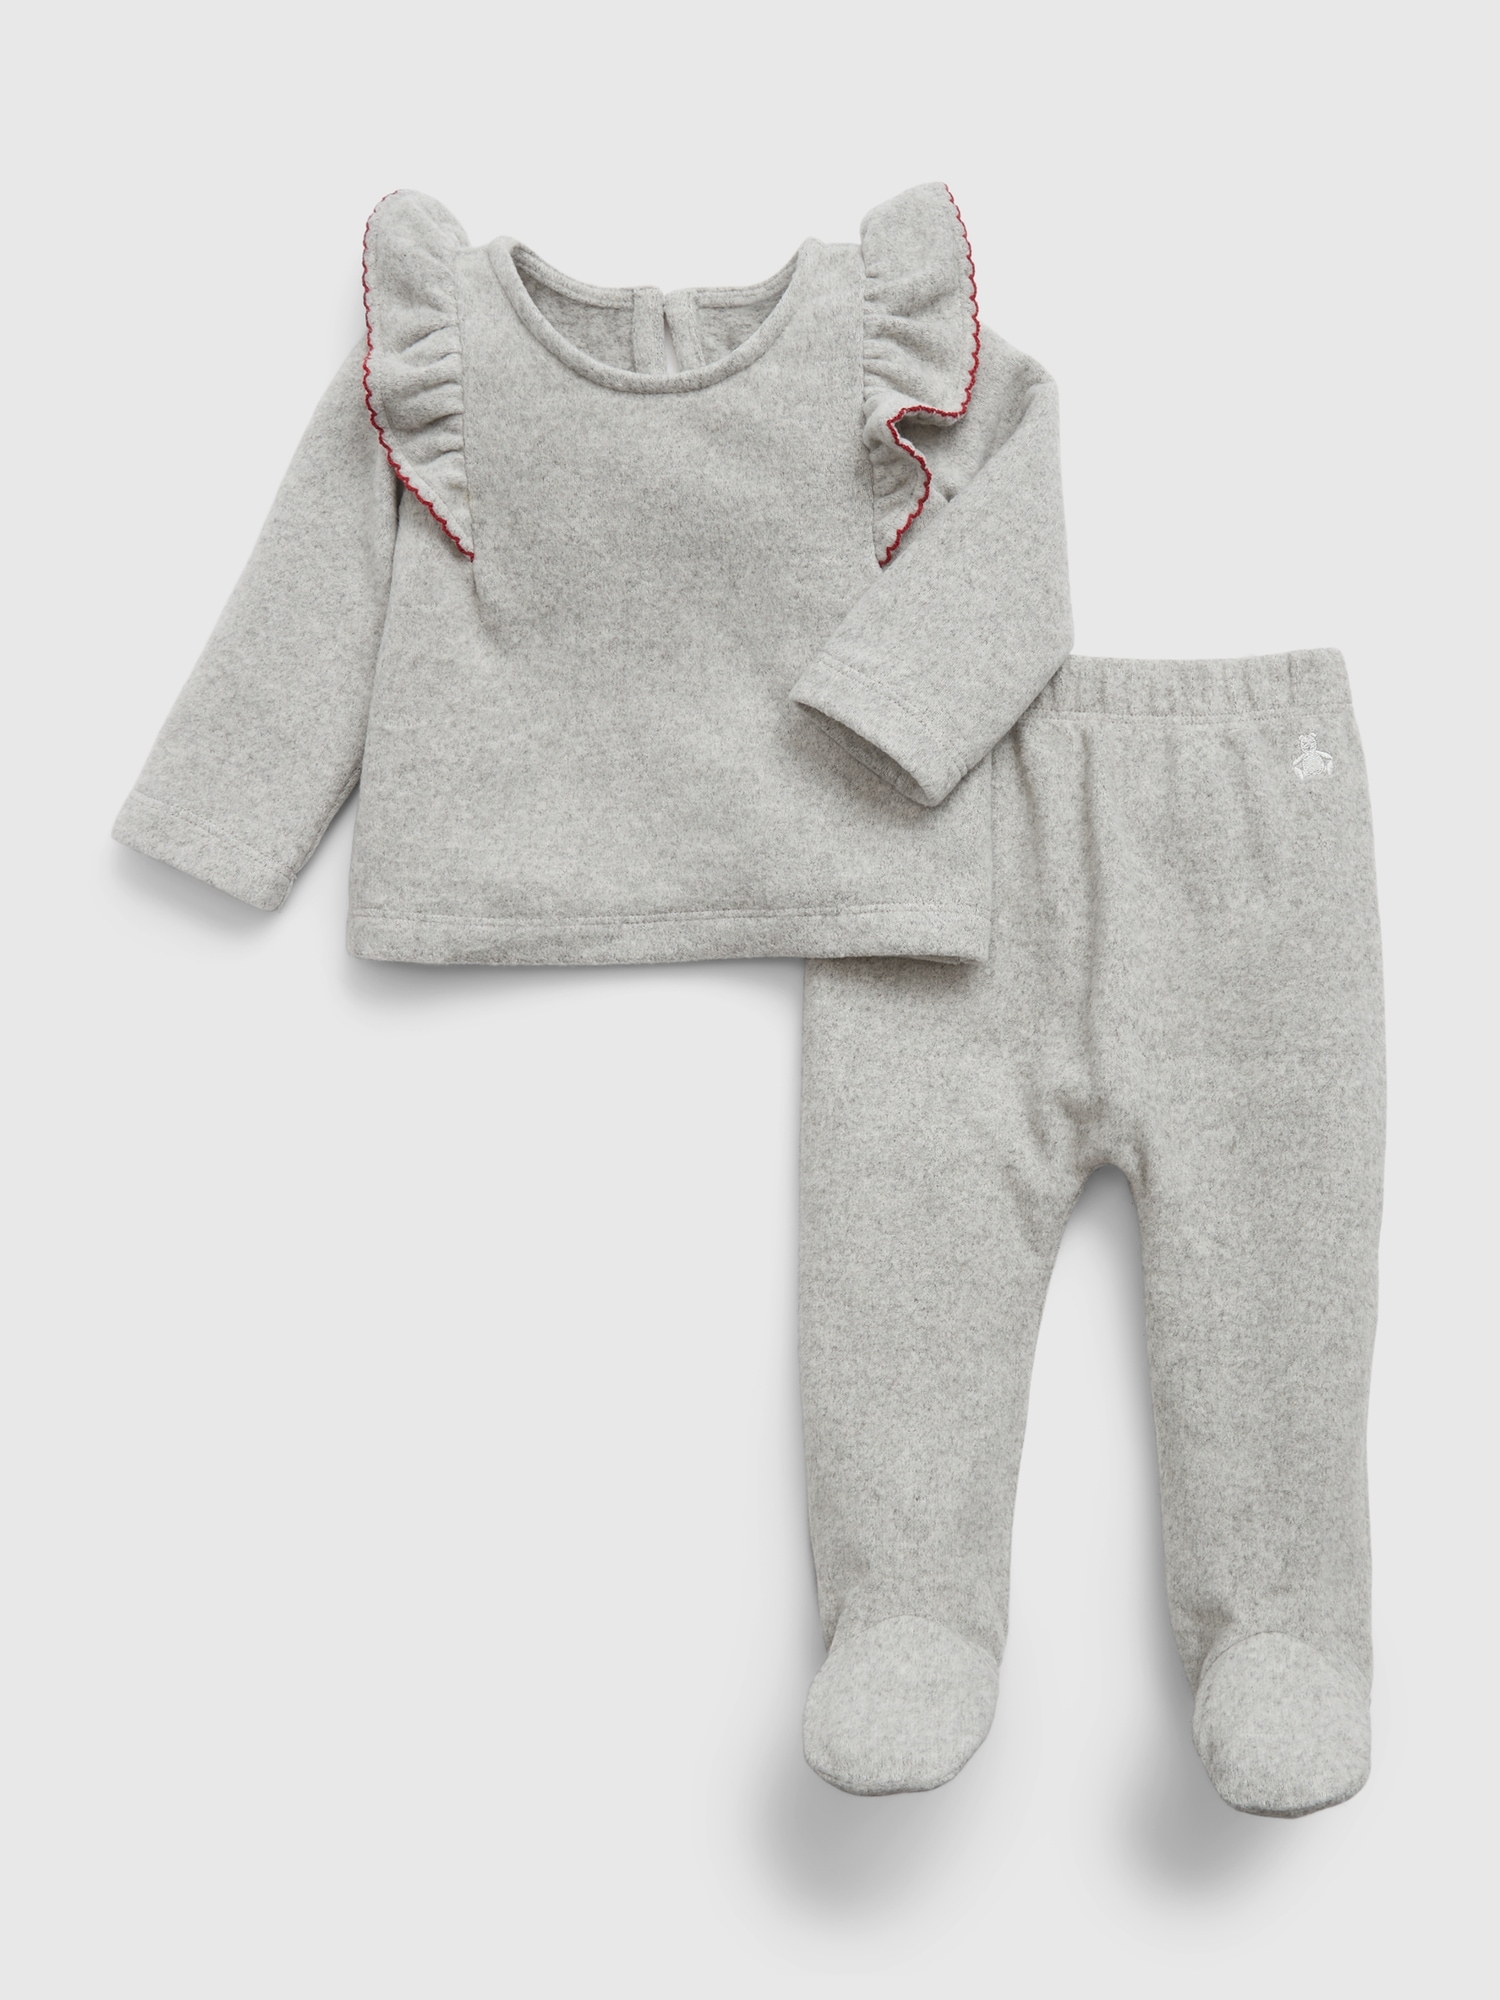 Gap Baby First Favorites Outfit Set